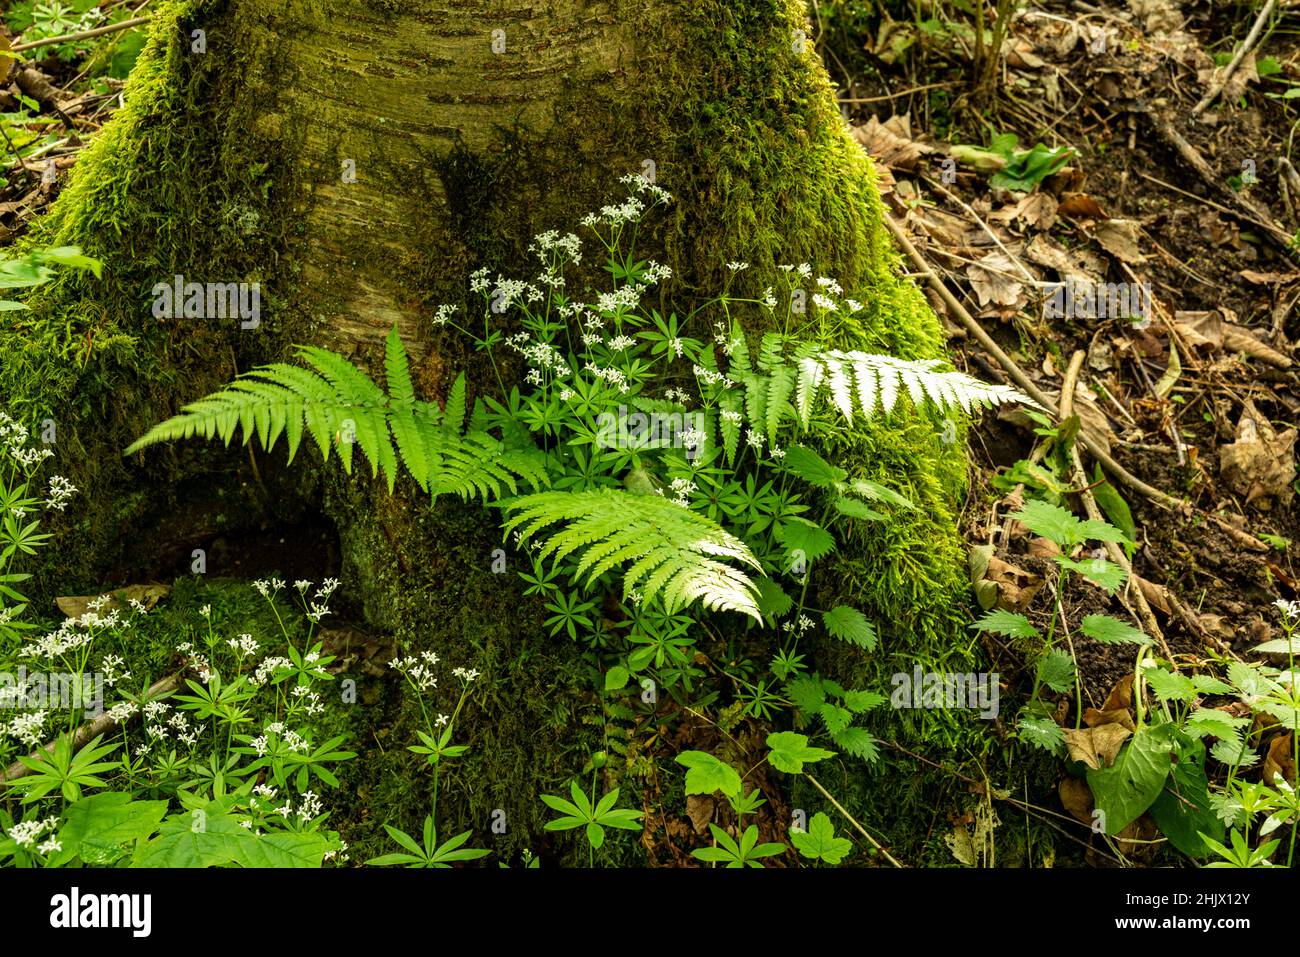 Close-up of tree trunk with fern and woodruff on the 'Weg der Blicke'  hiking trail, Extertal, Teutoburg Forest, North Rhine-Westphalia, Germany Stock Photo